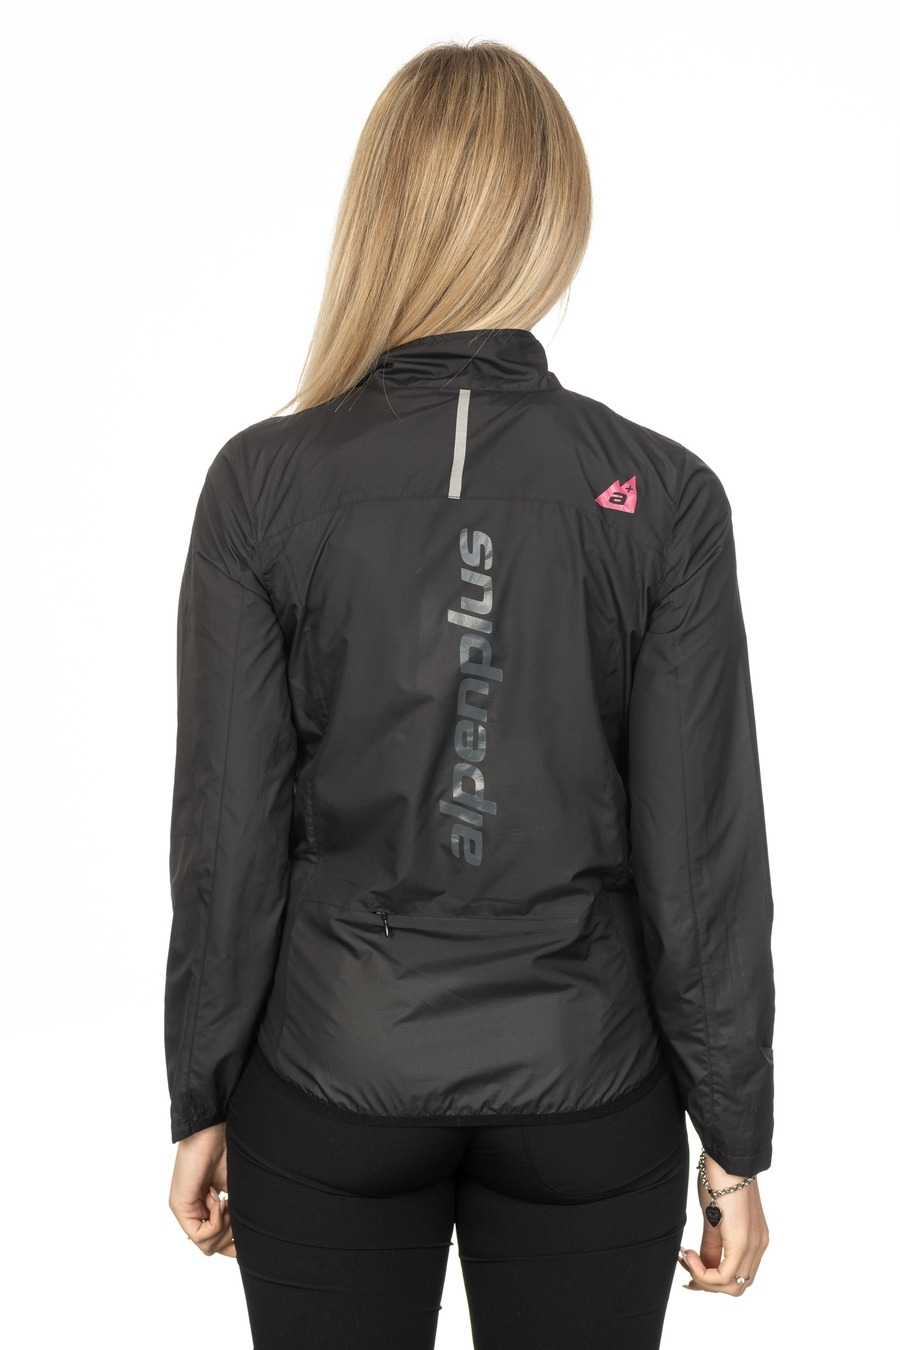 Woman Running Softshell Jacket, Breathable, Windproof and Water-repellent